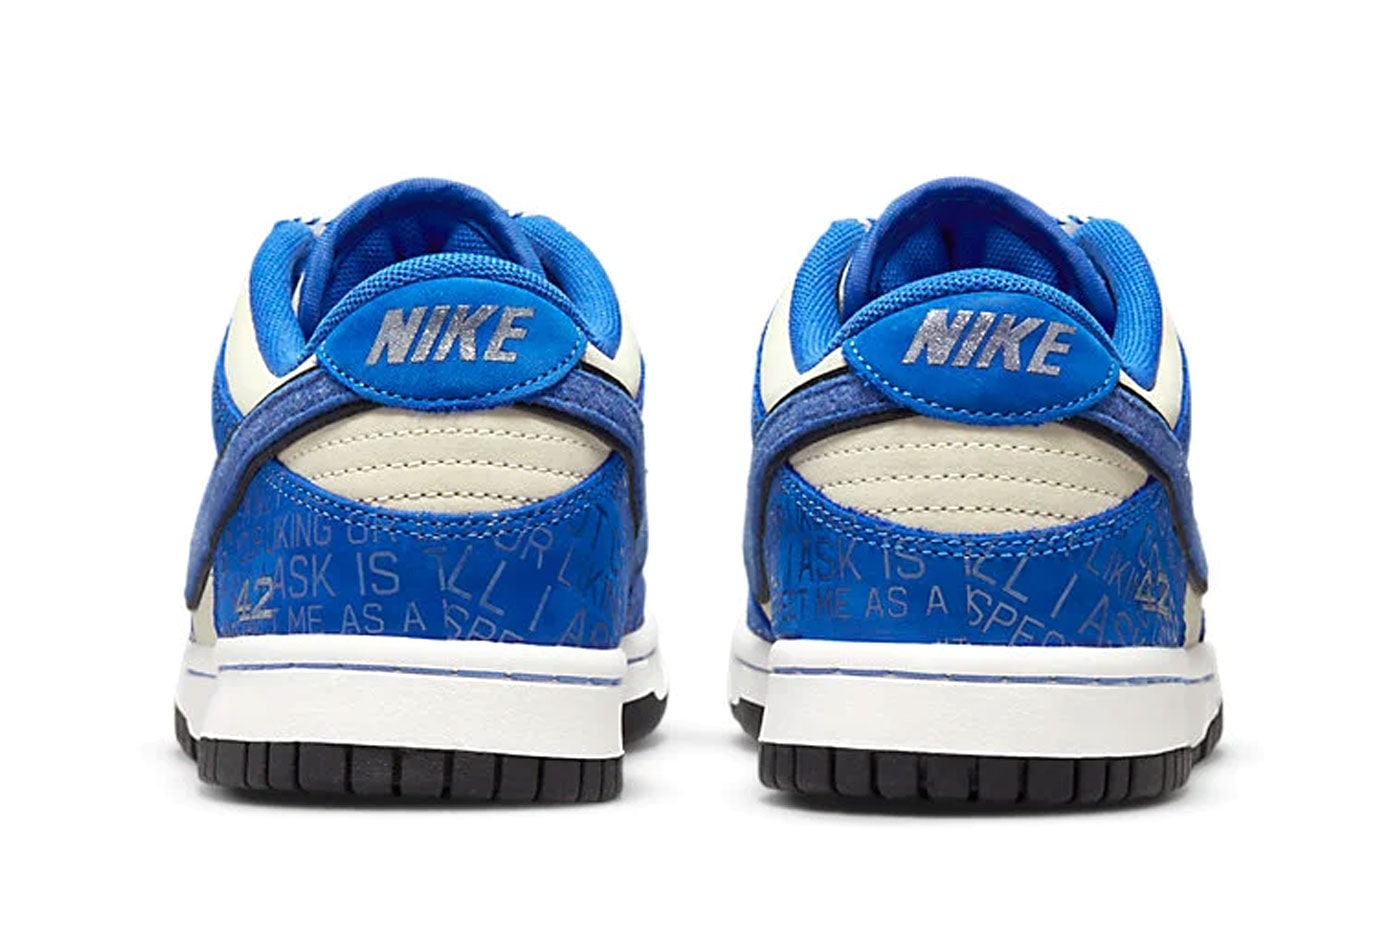 Nike Dunk Low Jackie Robinson MLB dodgers rookie of the year league mvp world series 75 years breaking barriers first african american player release info date